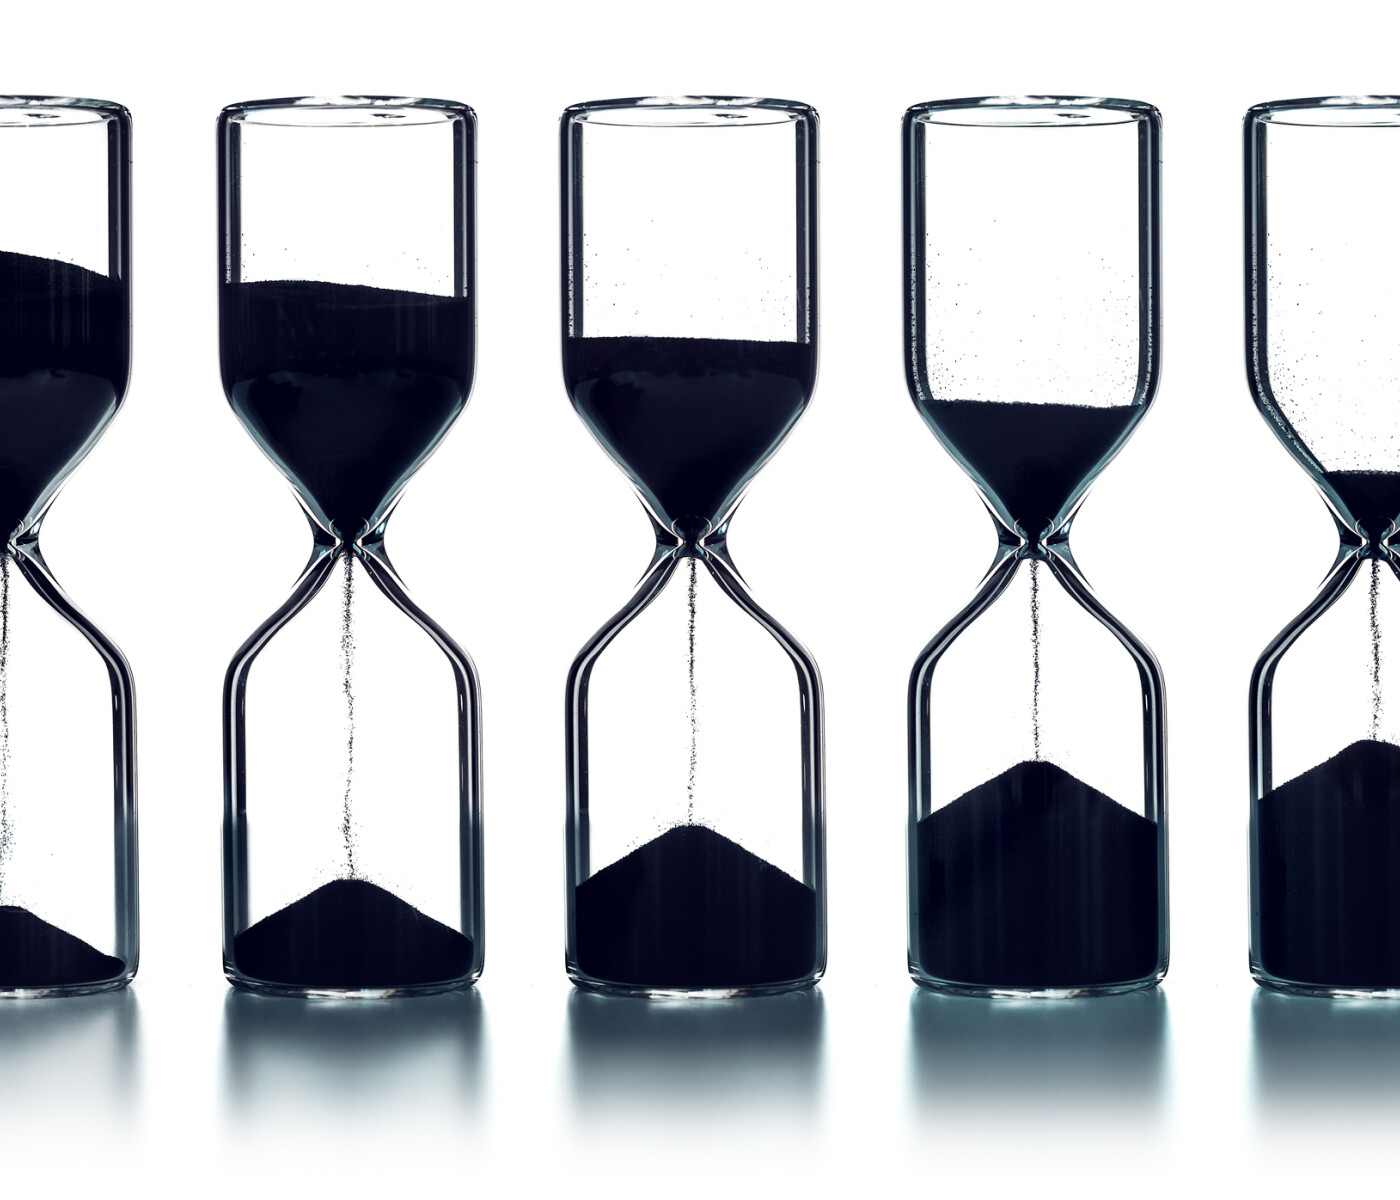 A series of hourglasses